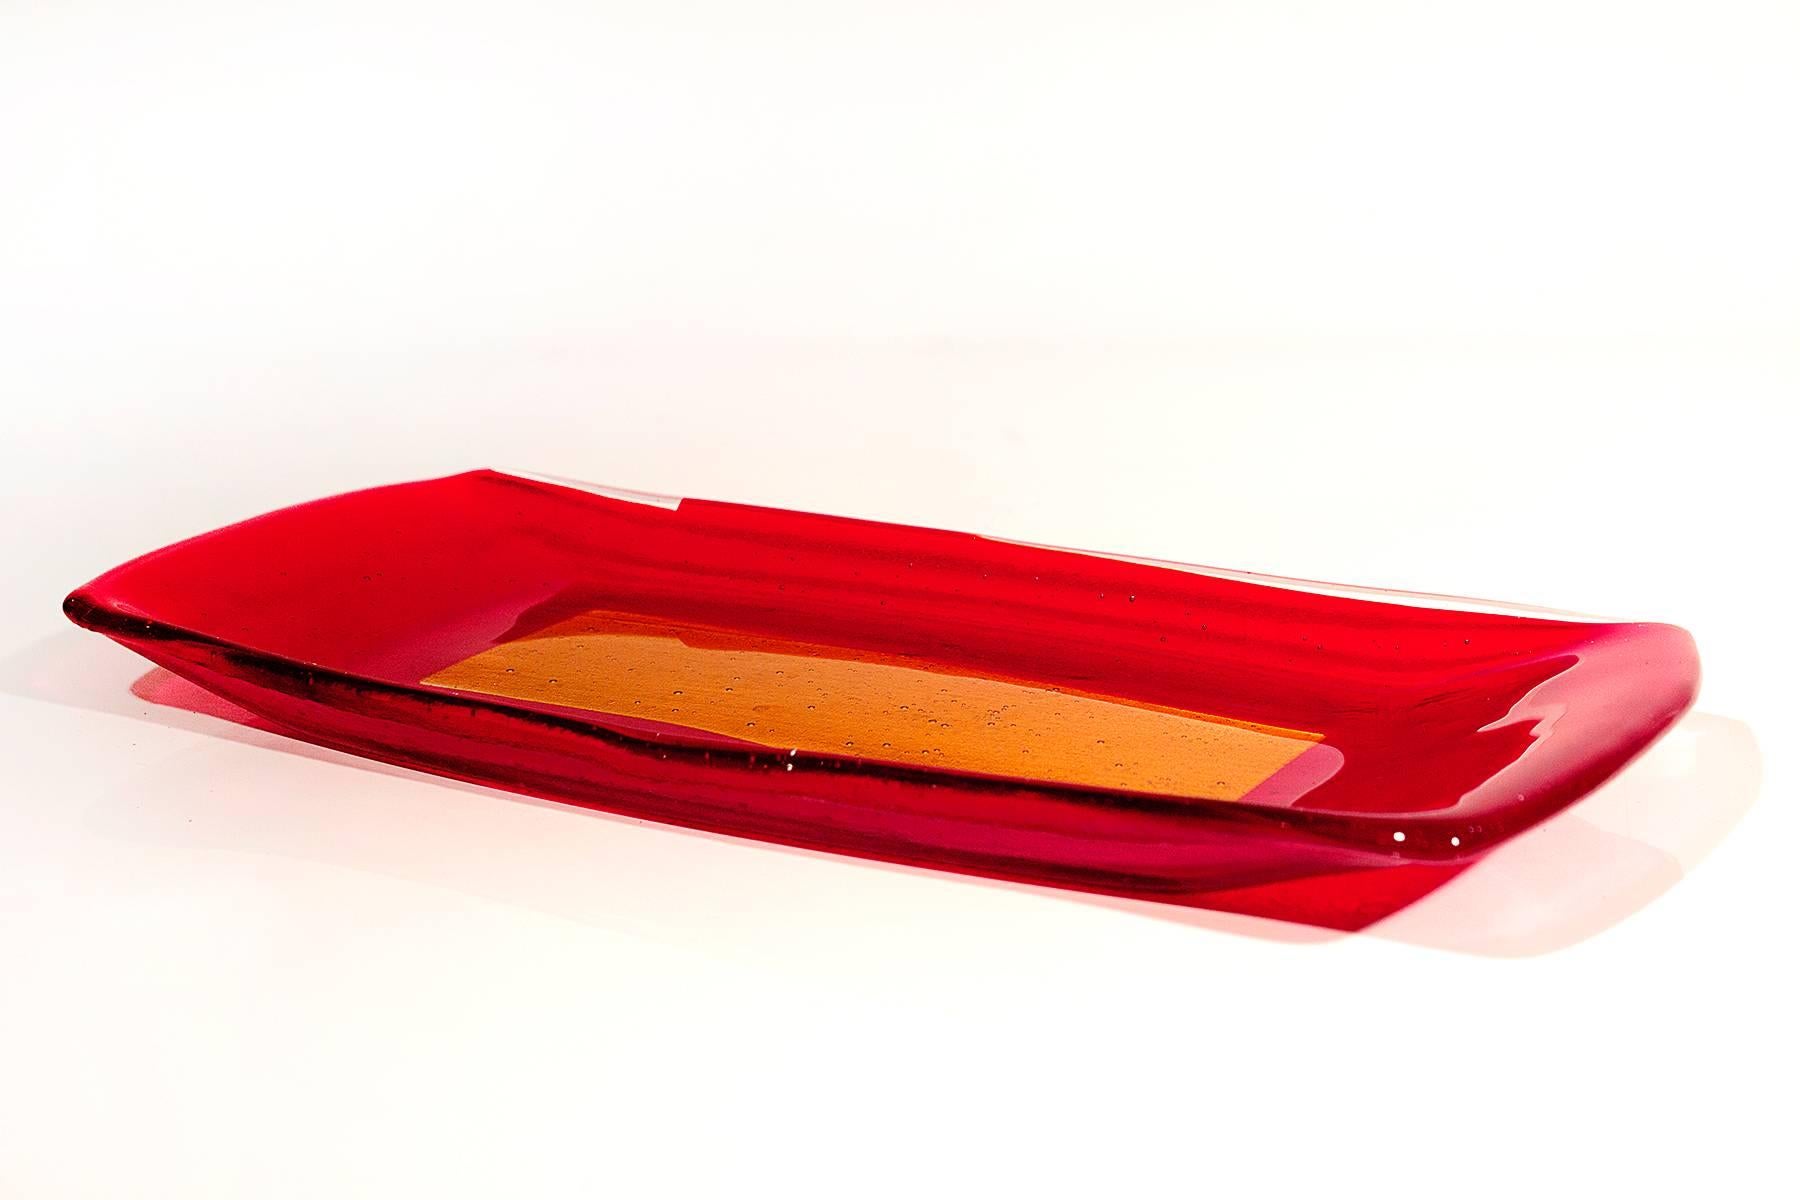 Well crafted red and yellow art glass tray with curved sides. Smooth surface with textured underside. Signed B.

Measures: 10.75" W x 5" D x 0.75" H.